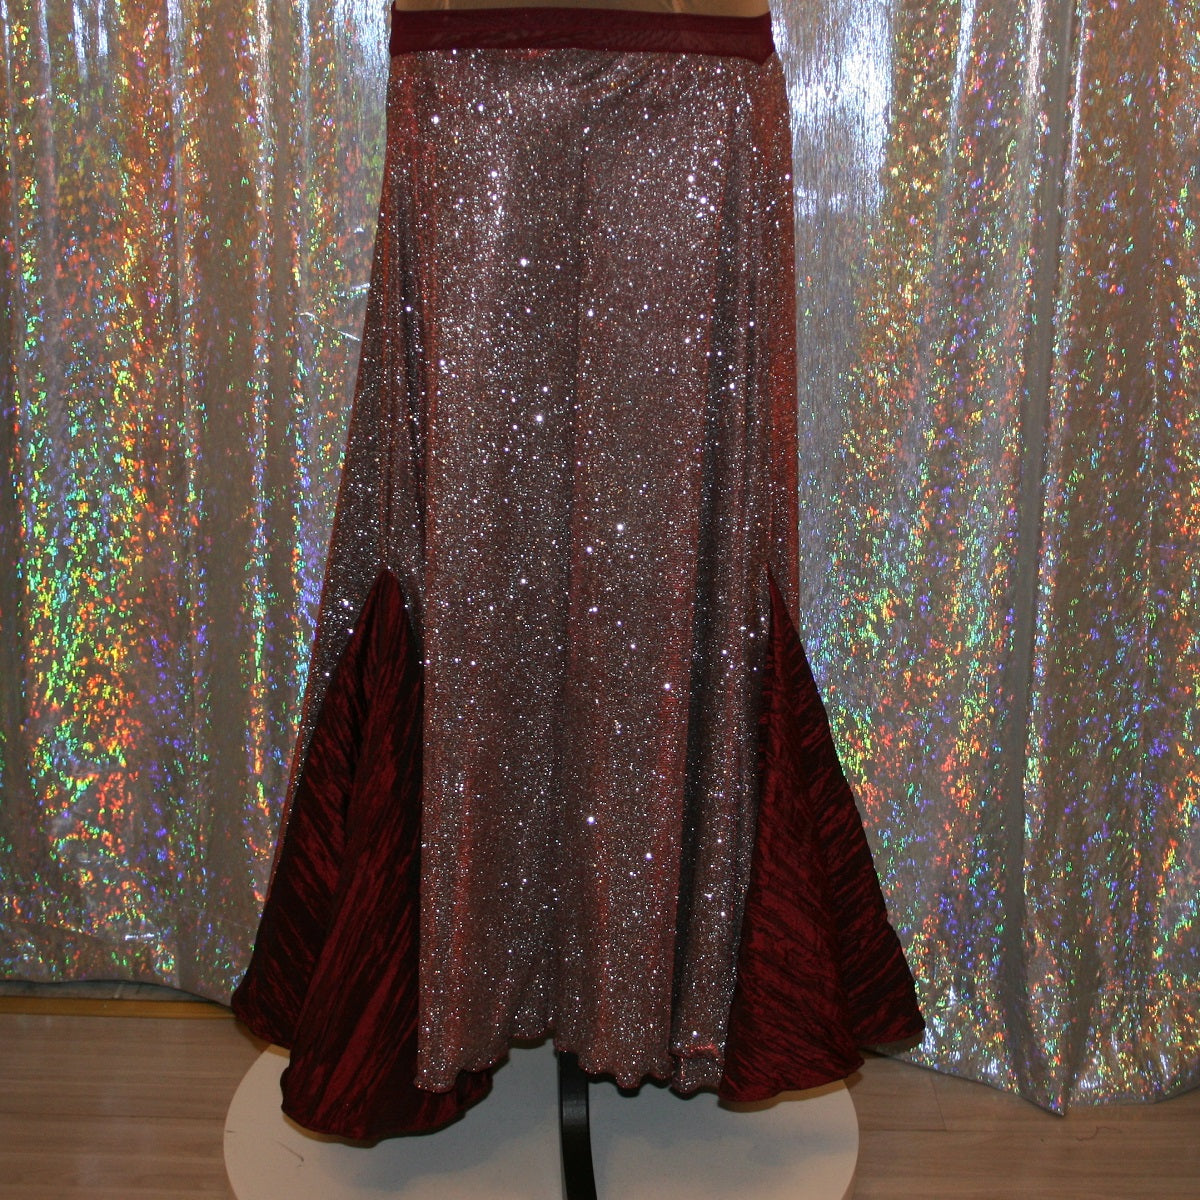 Ballroom dance skirt created of a very sparkly knit that shimmers silver & wine colors with insets of a 3 color pleated satin that looks wine colored with this particular fabric. 